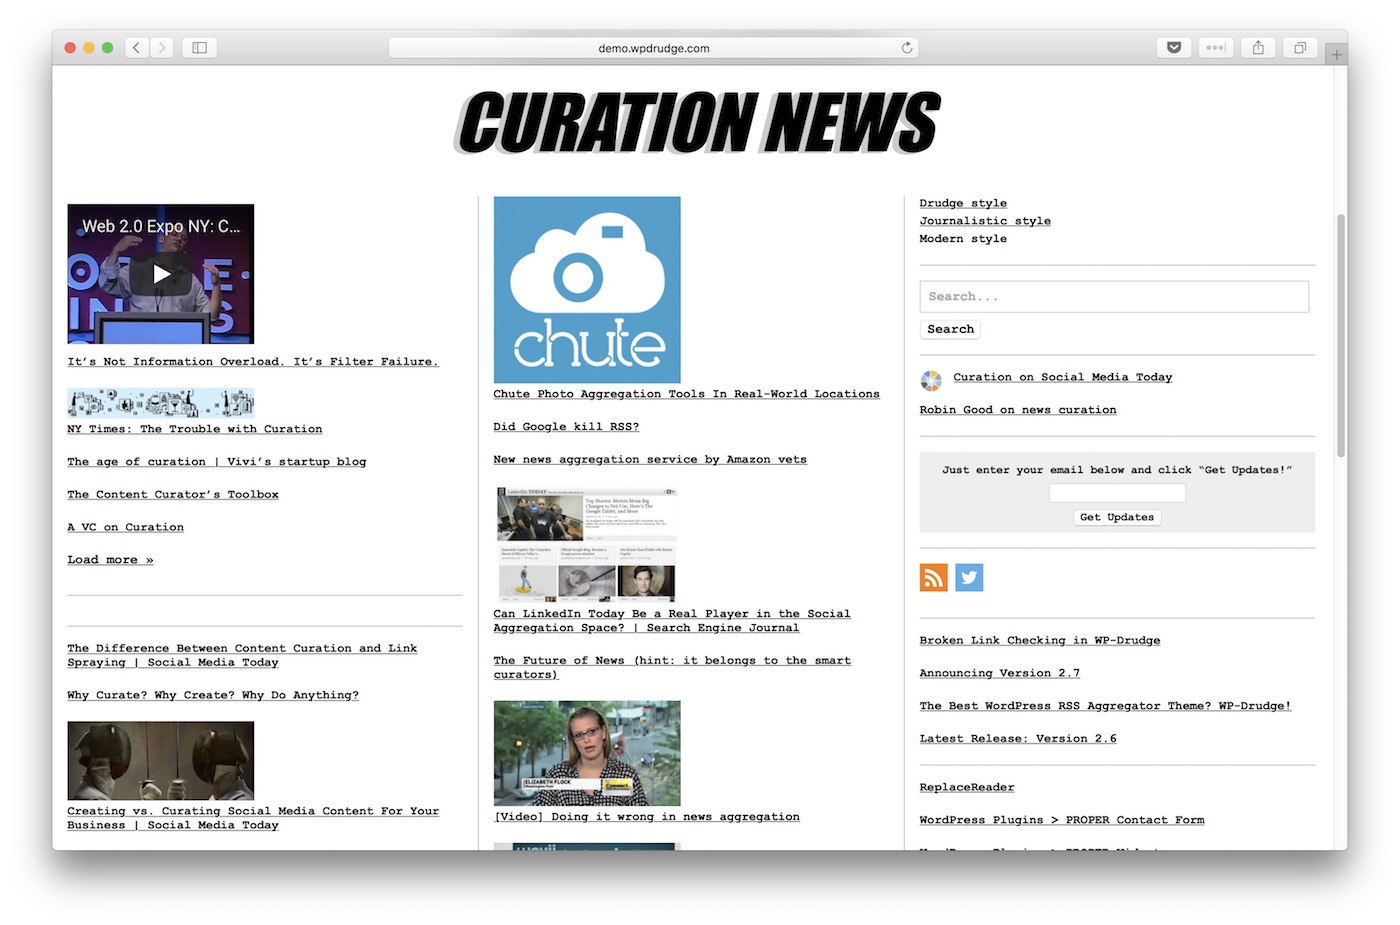 7 Great News Aggregator Websites You Should Check Out